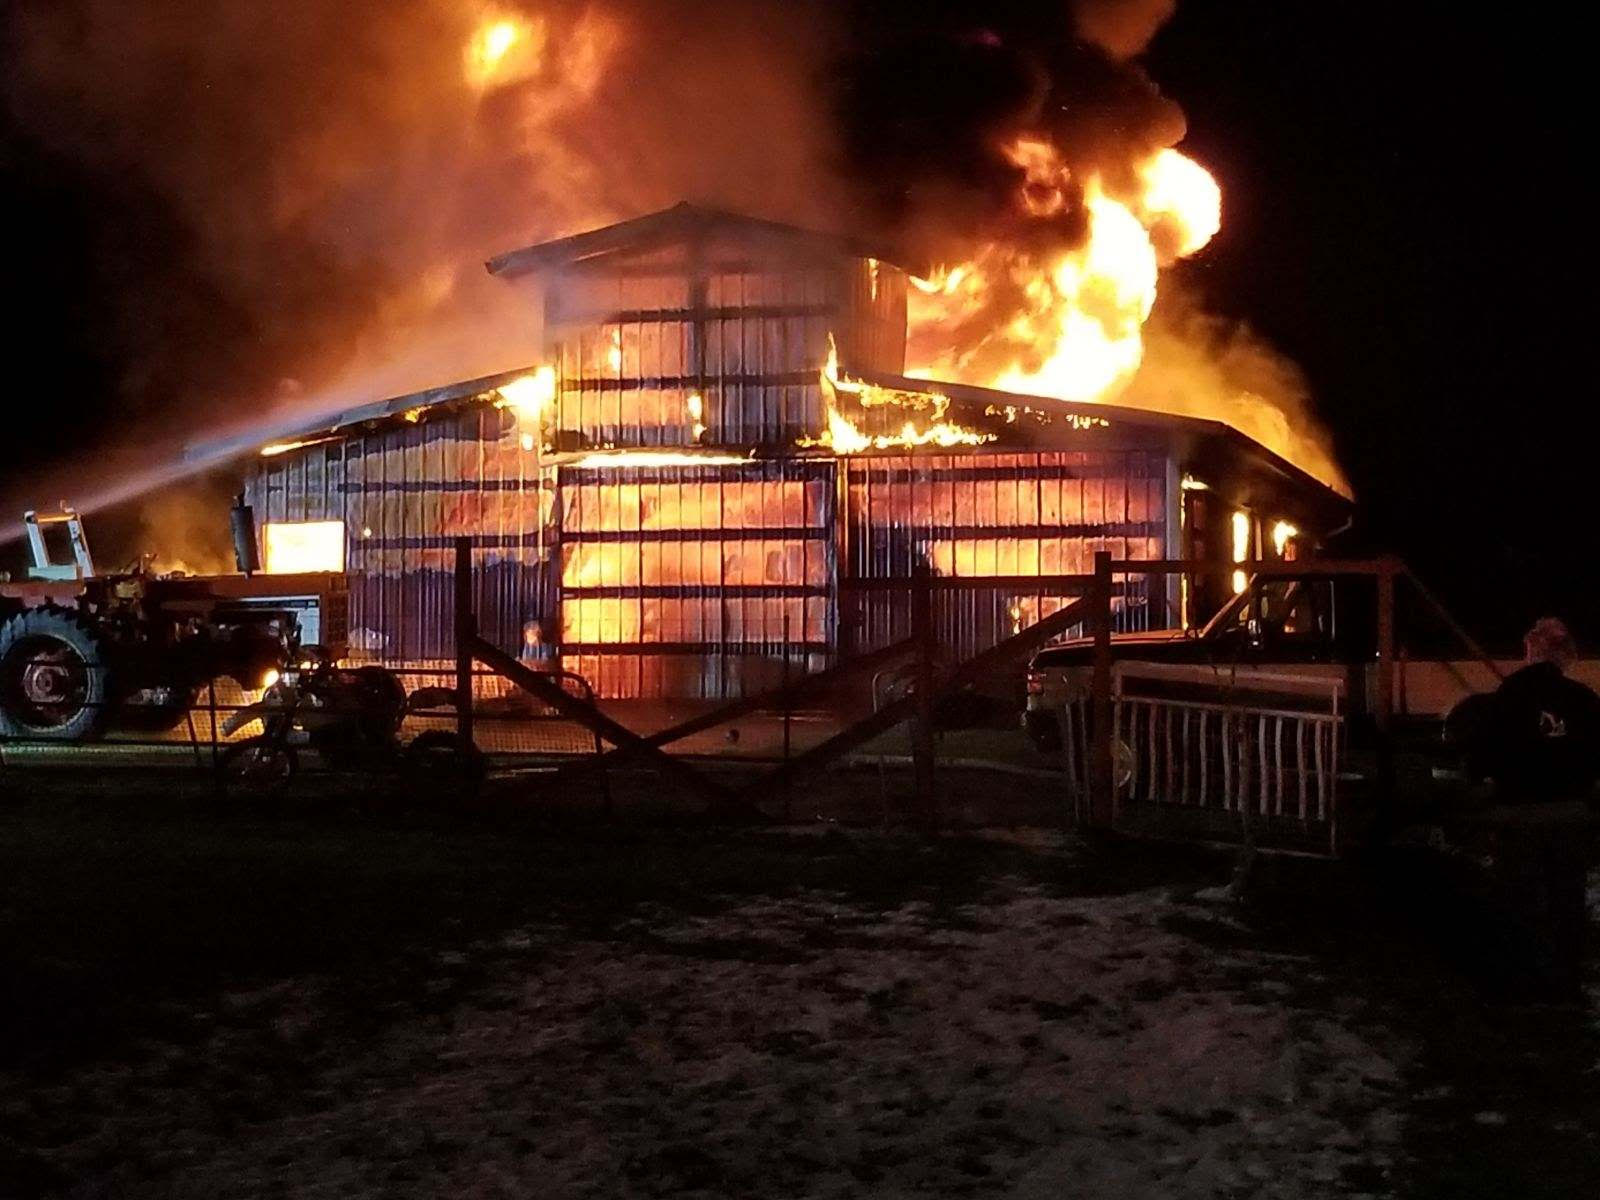 Clark County Fire District 3 crews were dispatched Thursday night to 23019 N.E. 182nd Ave. for a report of a shop fire. A barn appeared fully engulfed in flames by the time the first fire engine arrived.